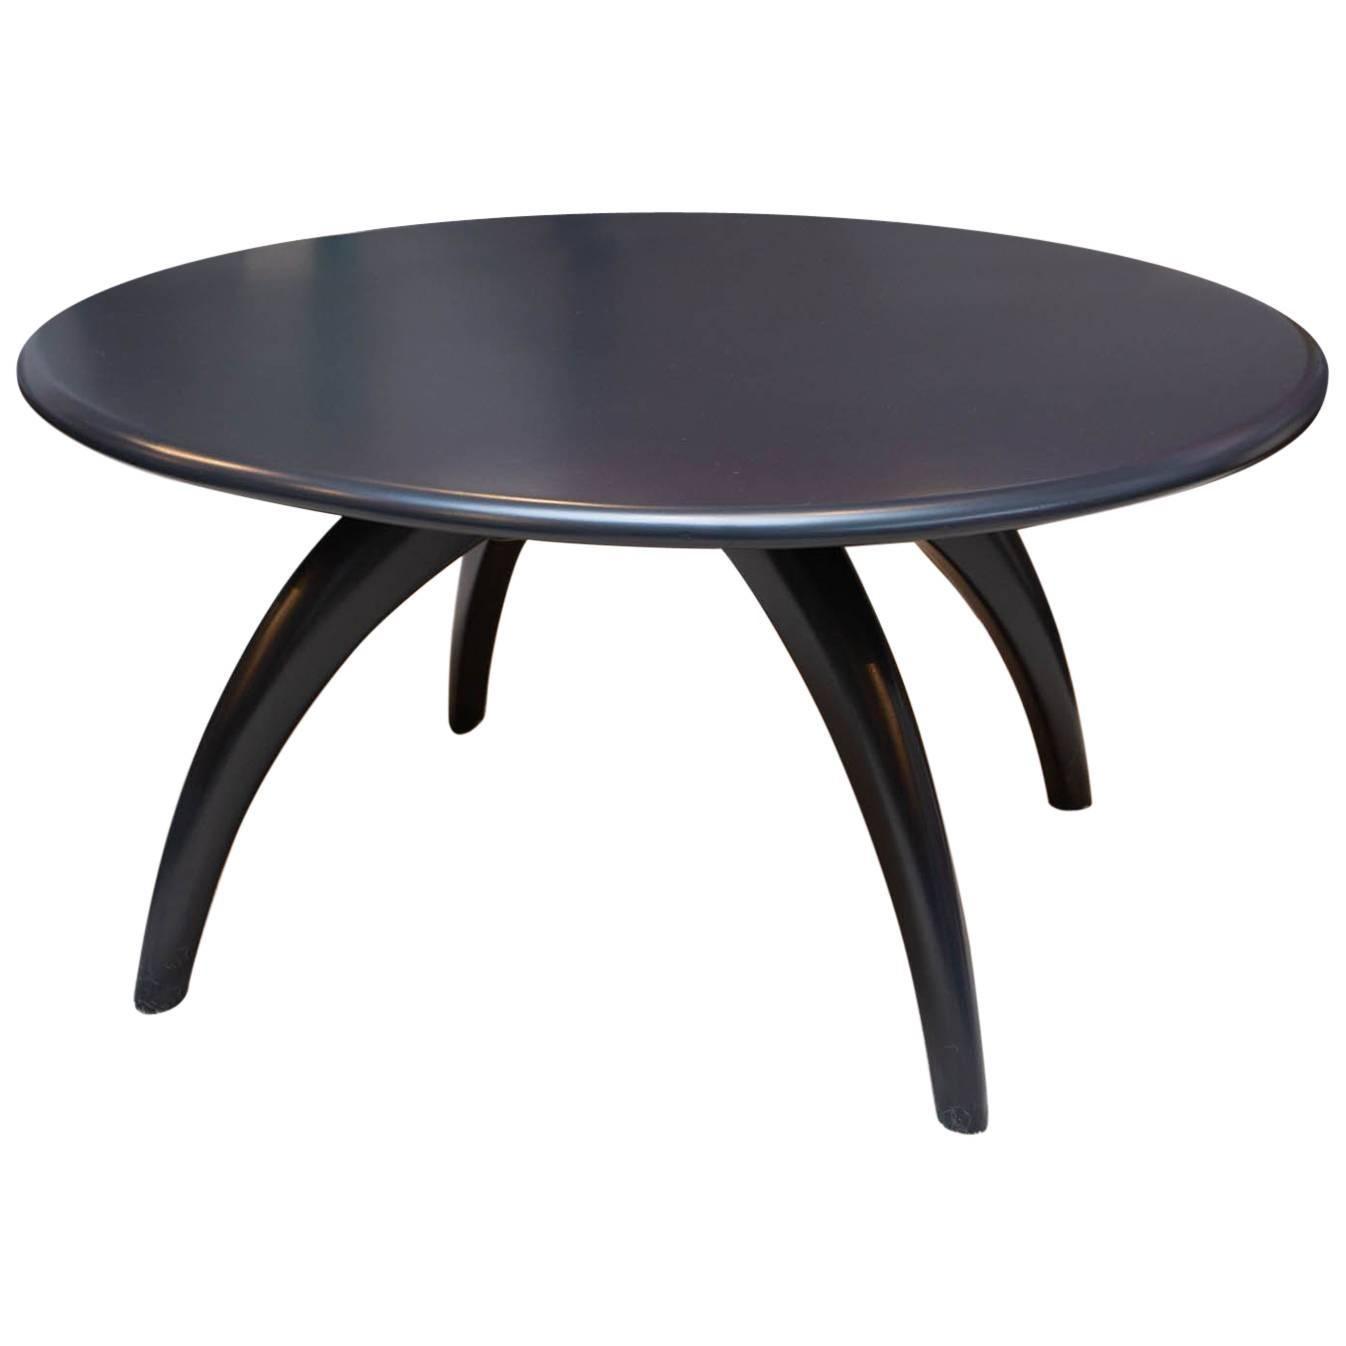 Round Lacquered Lazy Susan Coffee Table by Heywood Wakefield